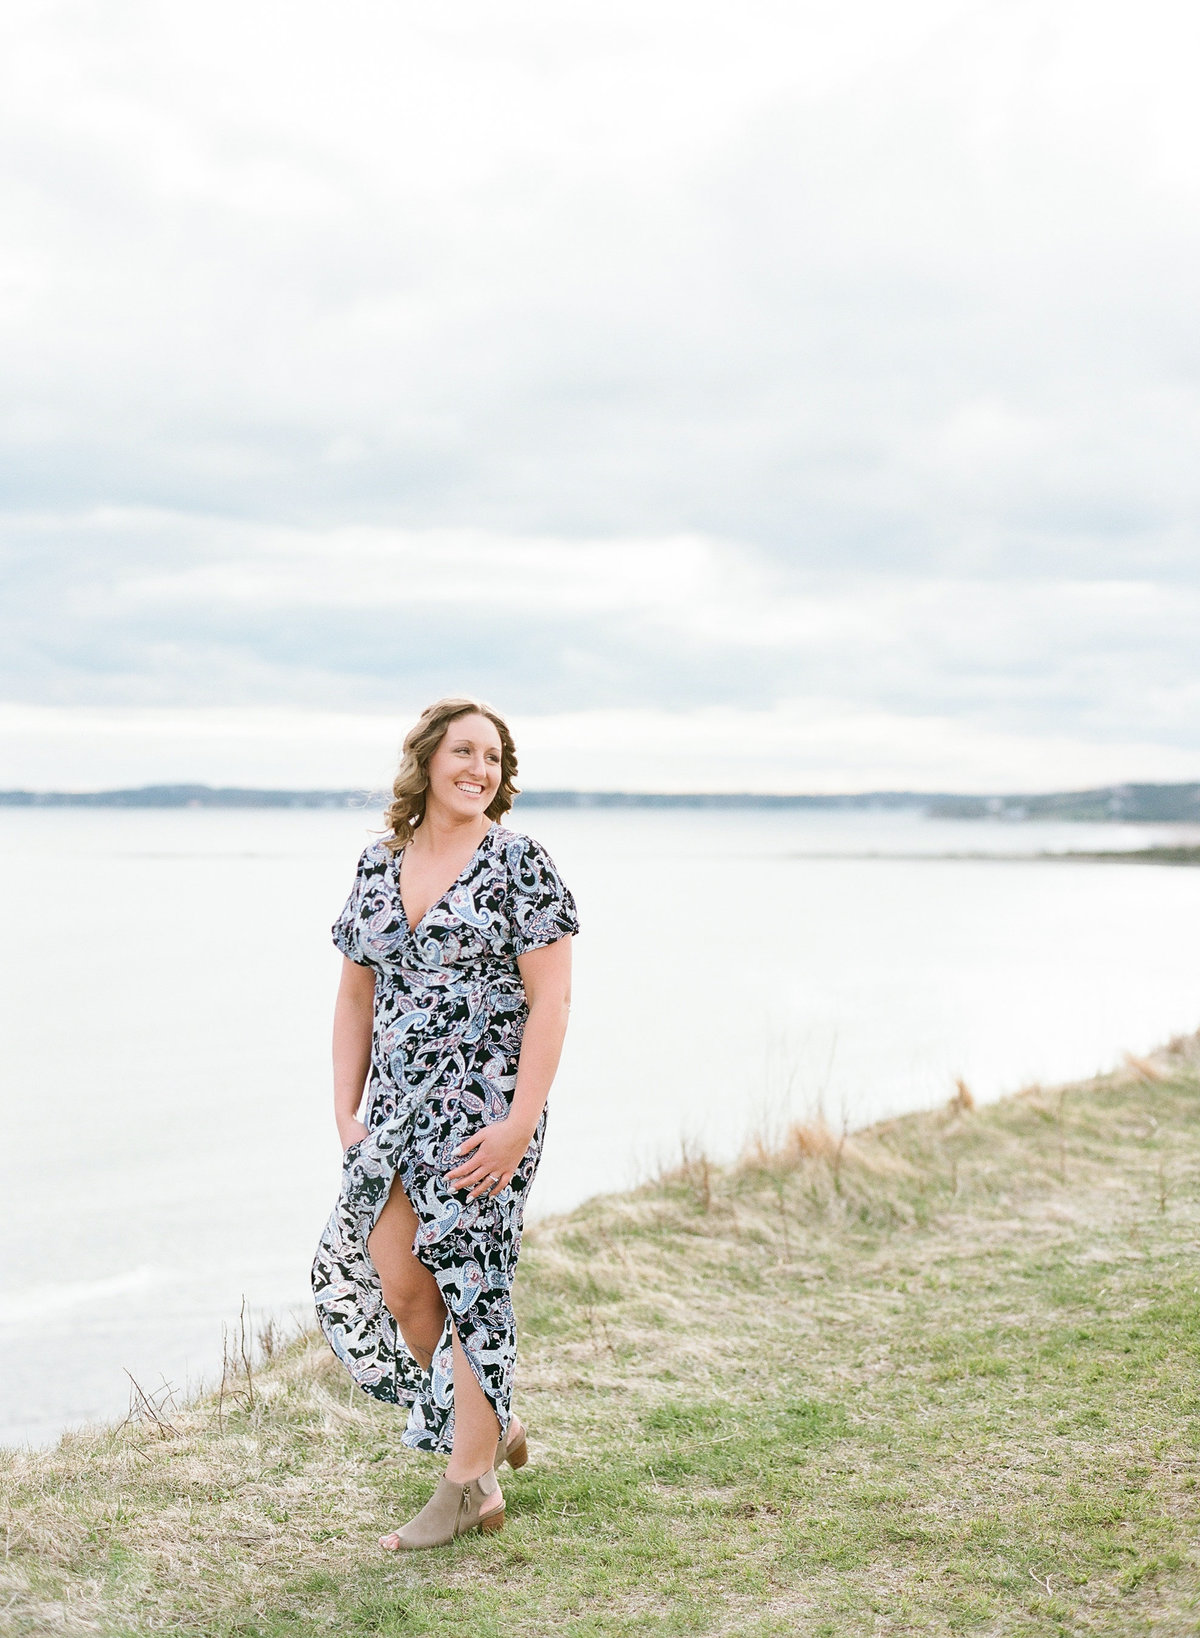 Jacqueline Anne Photography - Akayla and Andrew - Lawrencetown Beach-37